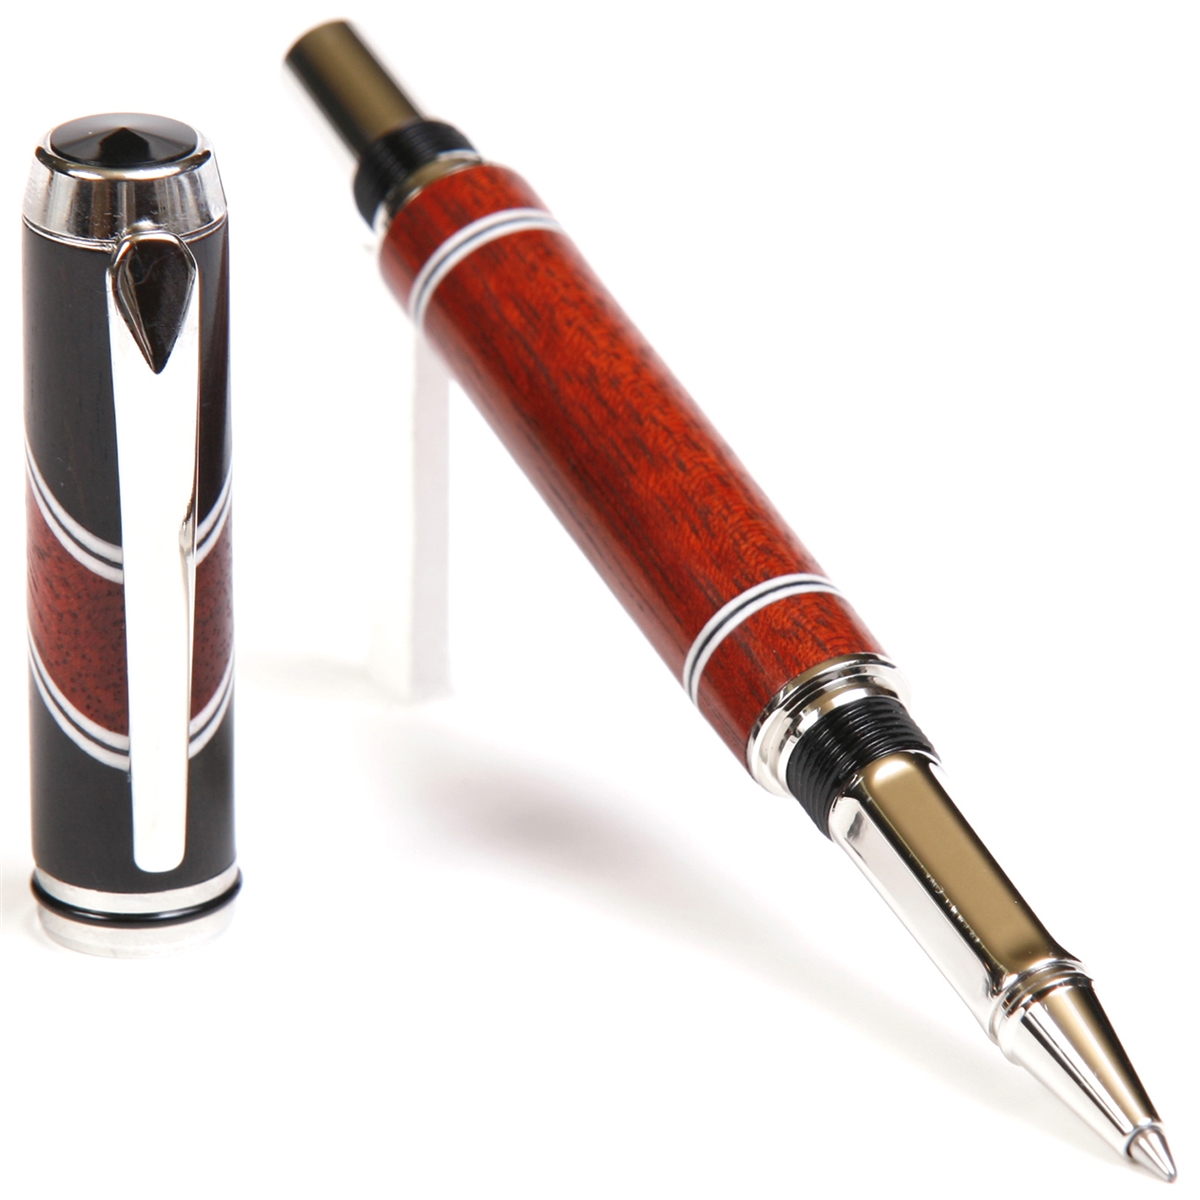 Ebony & Bloodwood with Inlays Baron Rollerball Pen - Lanier Pens